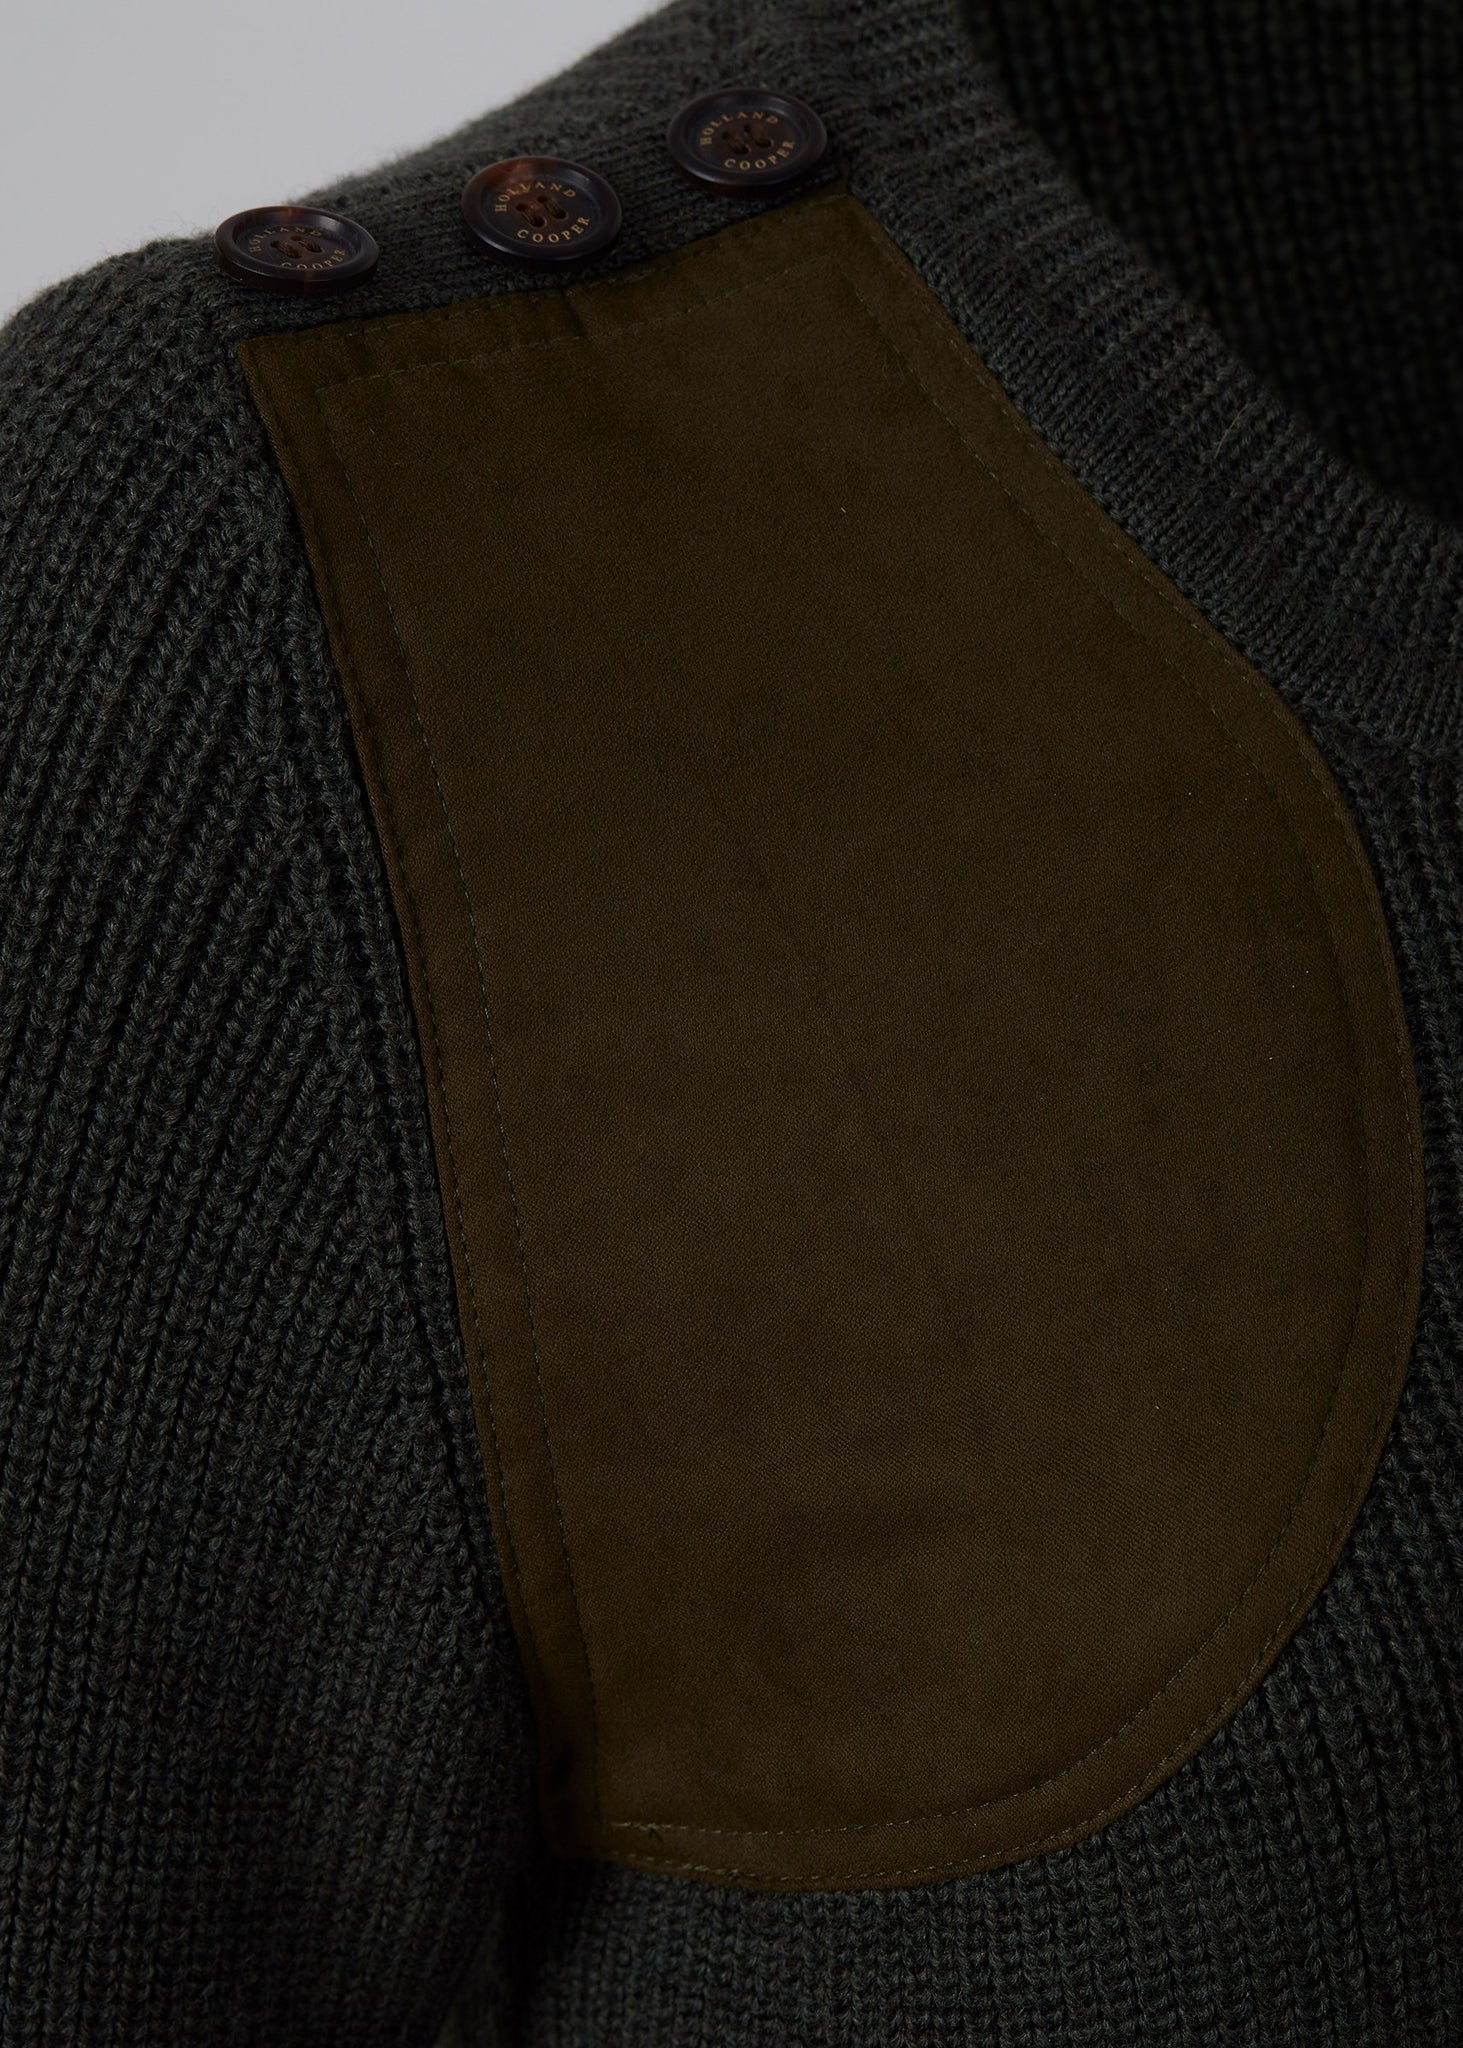 horn button detail accross shoulder and brown faux suede gunpatch detail on classic crew neck slim fit merino wool jumper in forest green with quilted elbow patches in the same brown suede material